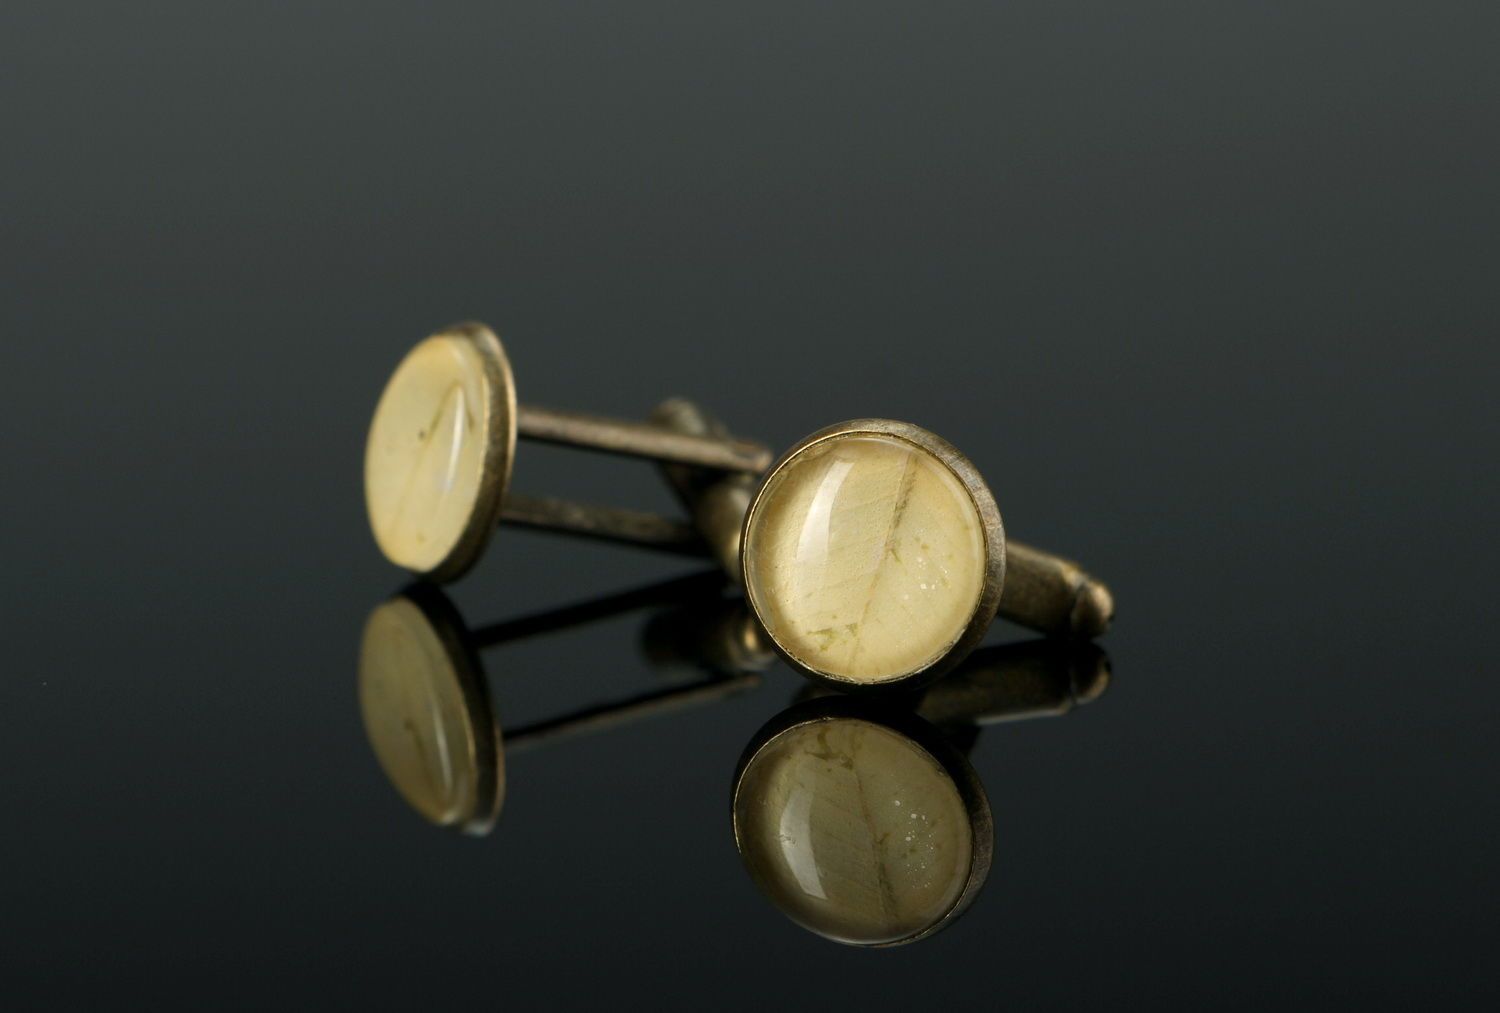 Cufflinks made of clover leaves photo 1